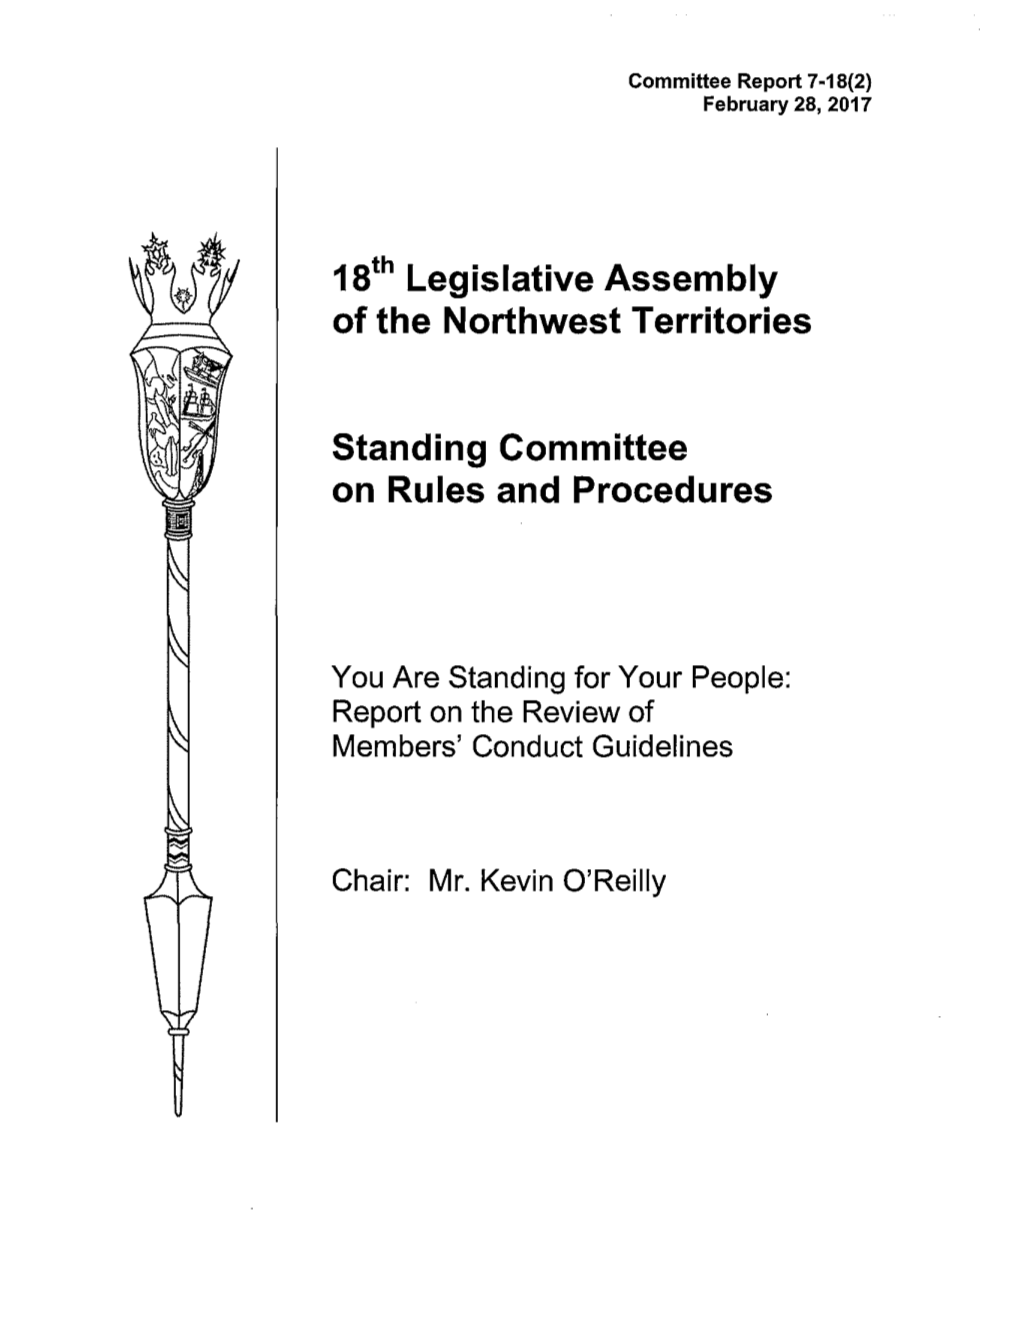 1 Ath Legislative Assembly of the Northwest Territories Standing Committee on Rules and Procedures